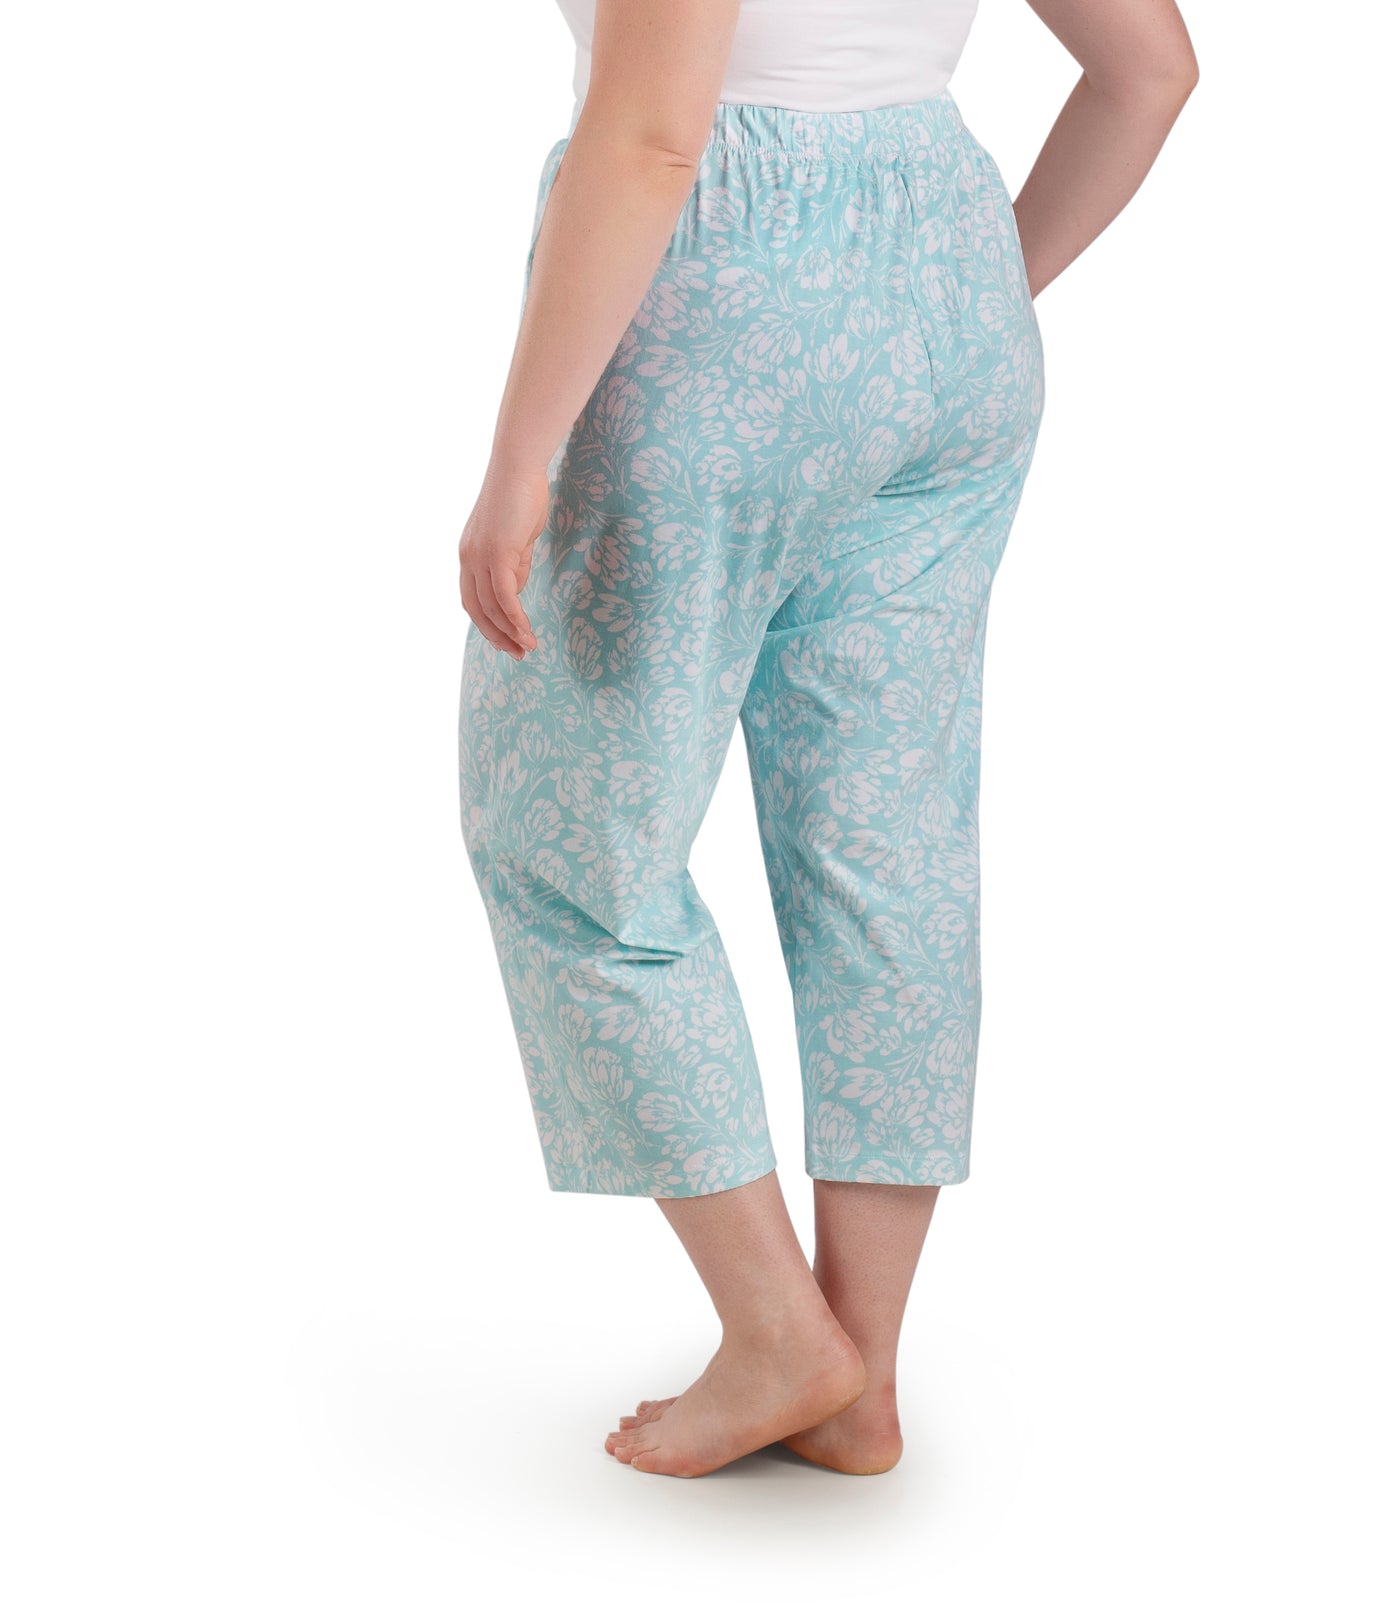 Bottom half of plus sized woman, facing back, wearing JunoActive JunoBliss Pocketed Sleep Capris Spring Blue Floral Print. The capri hemline is a few inches above ankle and a little longer than mid calf. Pockets on both sides.